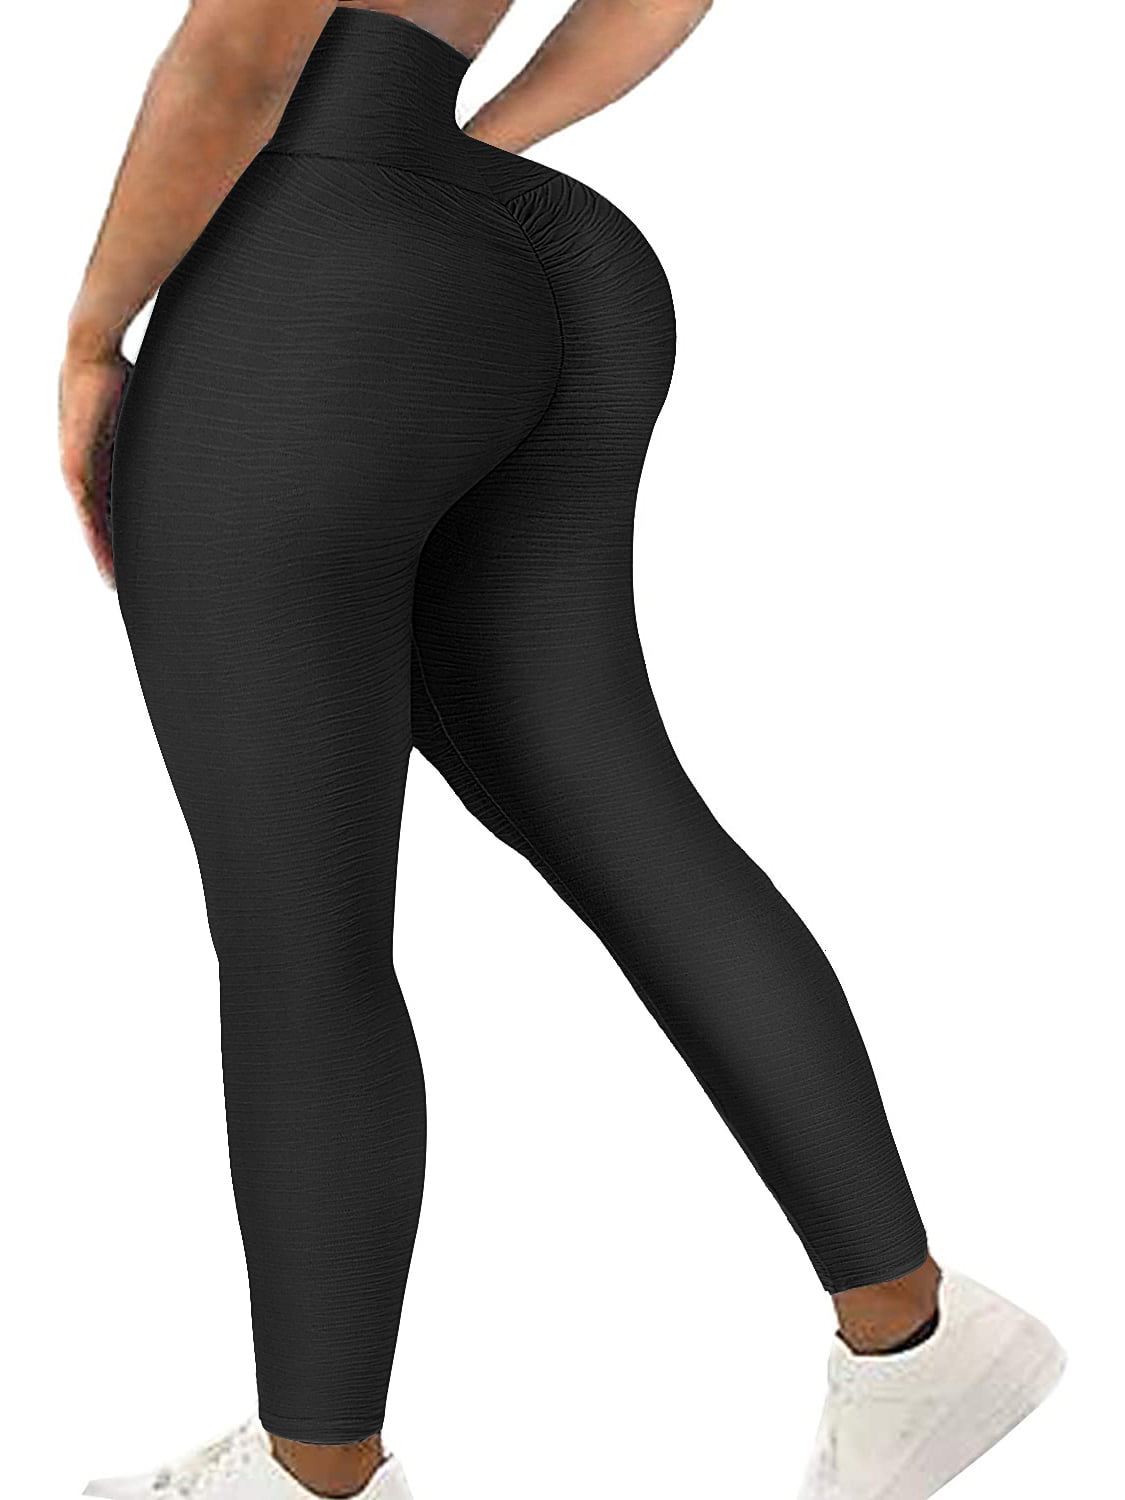 COMFREE High Waisted Textured Ruched Scrunch Butt Honeycomb Leggings Workout Gym Booty Popping Anti Cellulite Yoga Pants